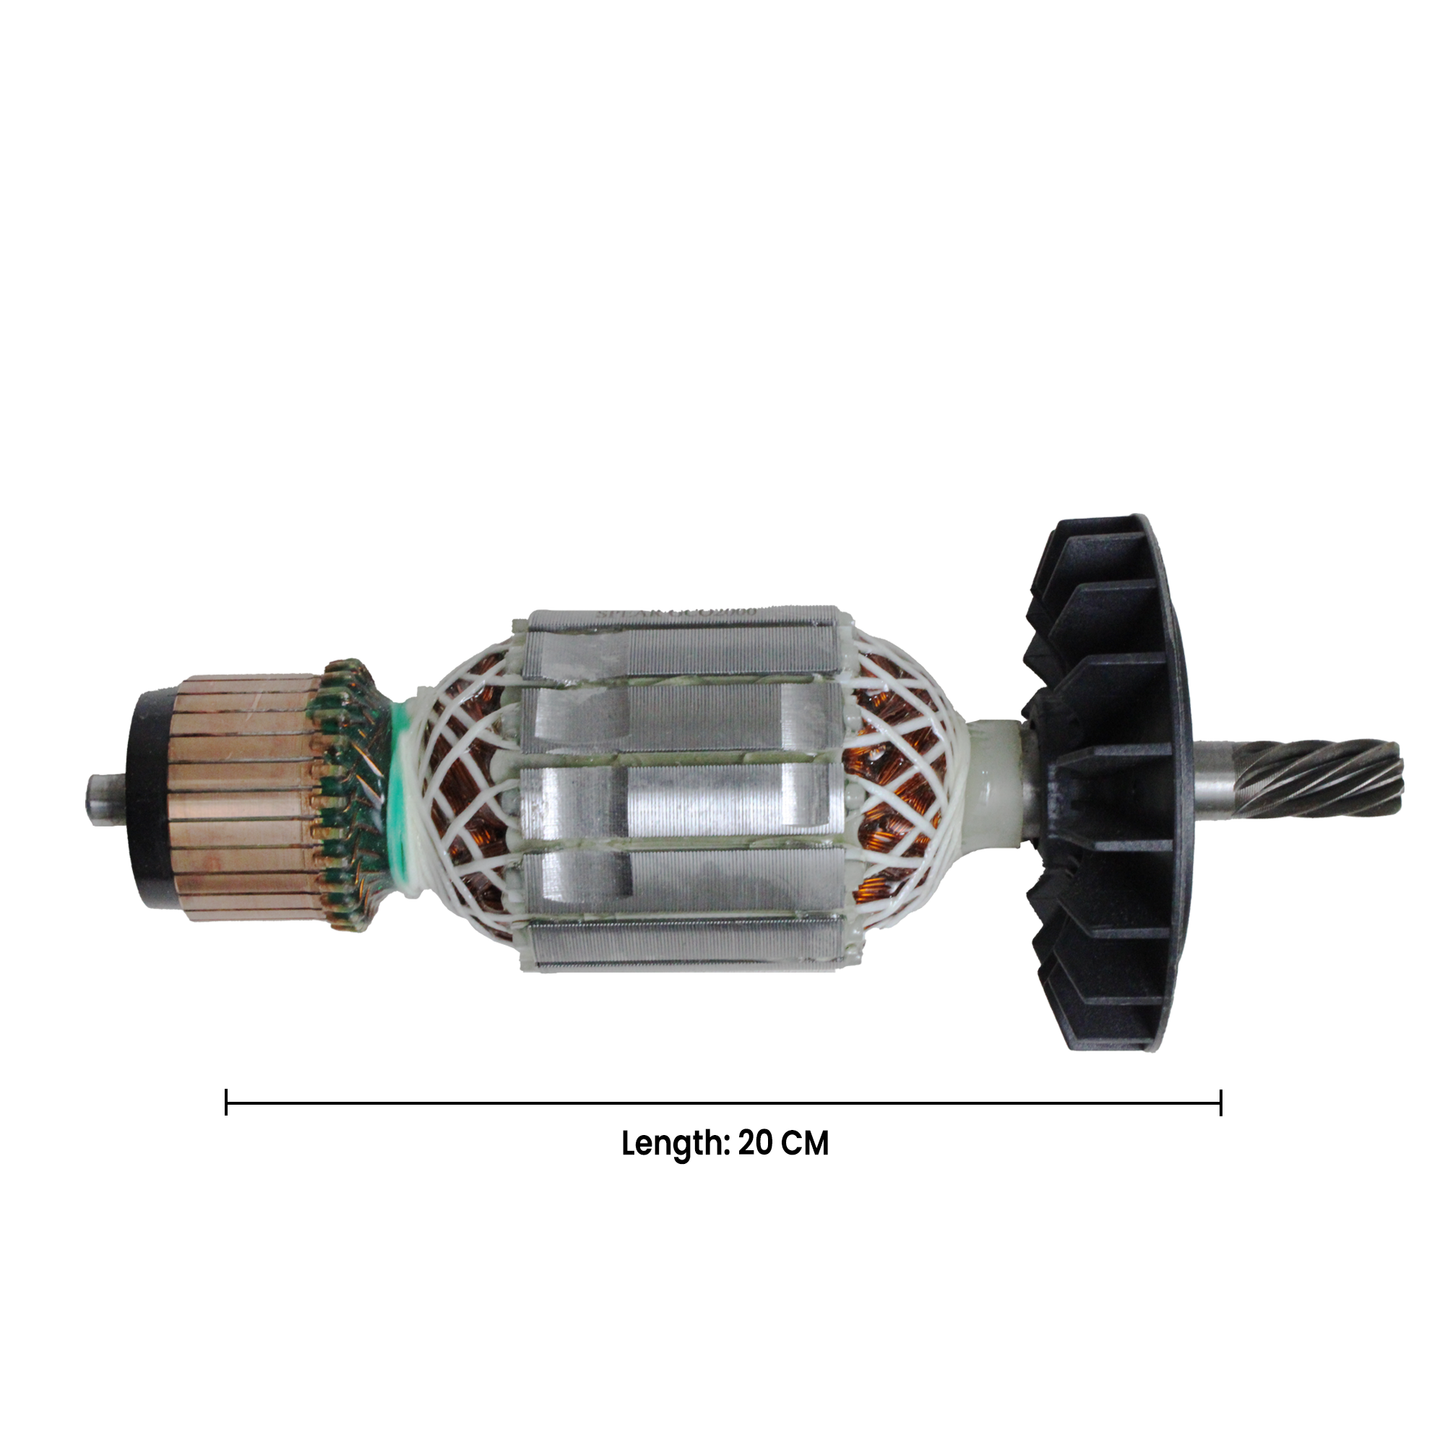 AEGON ACWFGC02000 Copper Armature - Compatible with Aegon ACM14, Bosch GCO2000, and More Brands & Models